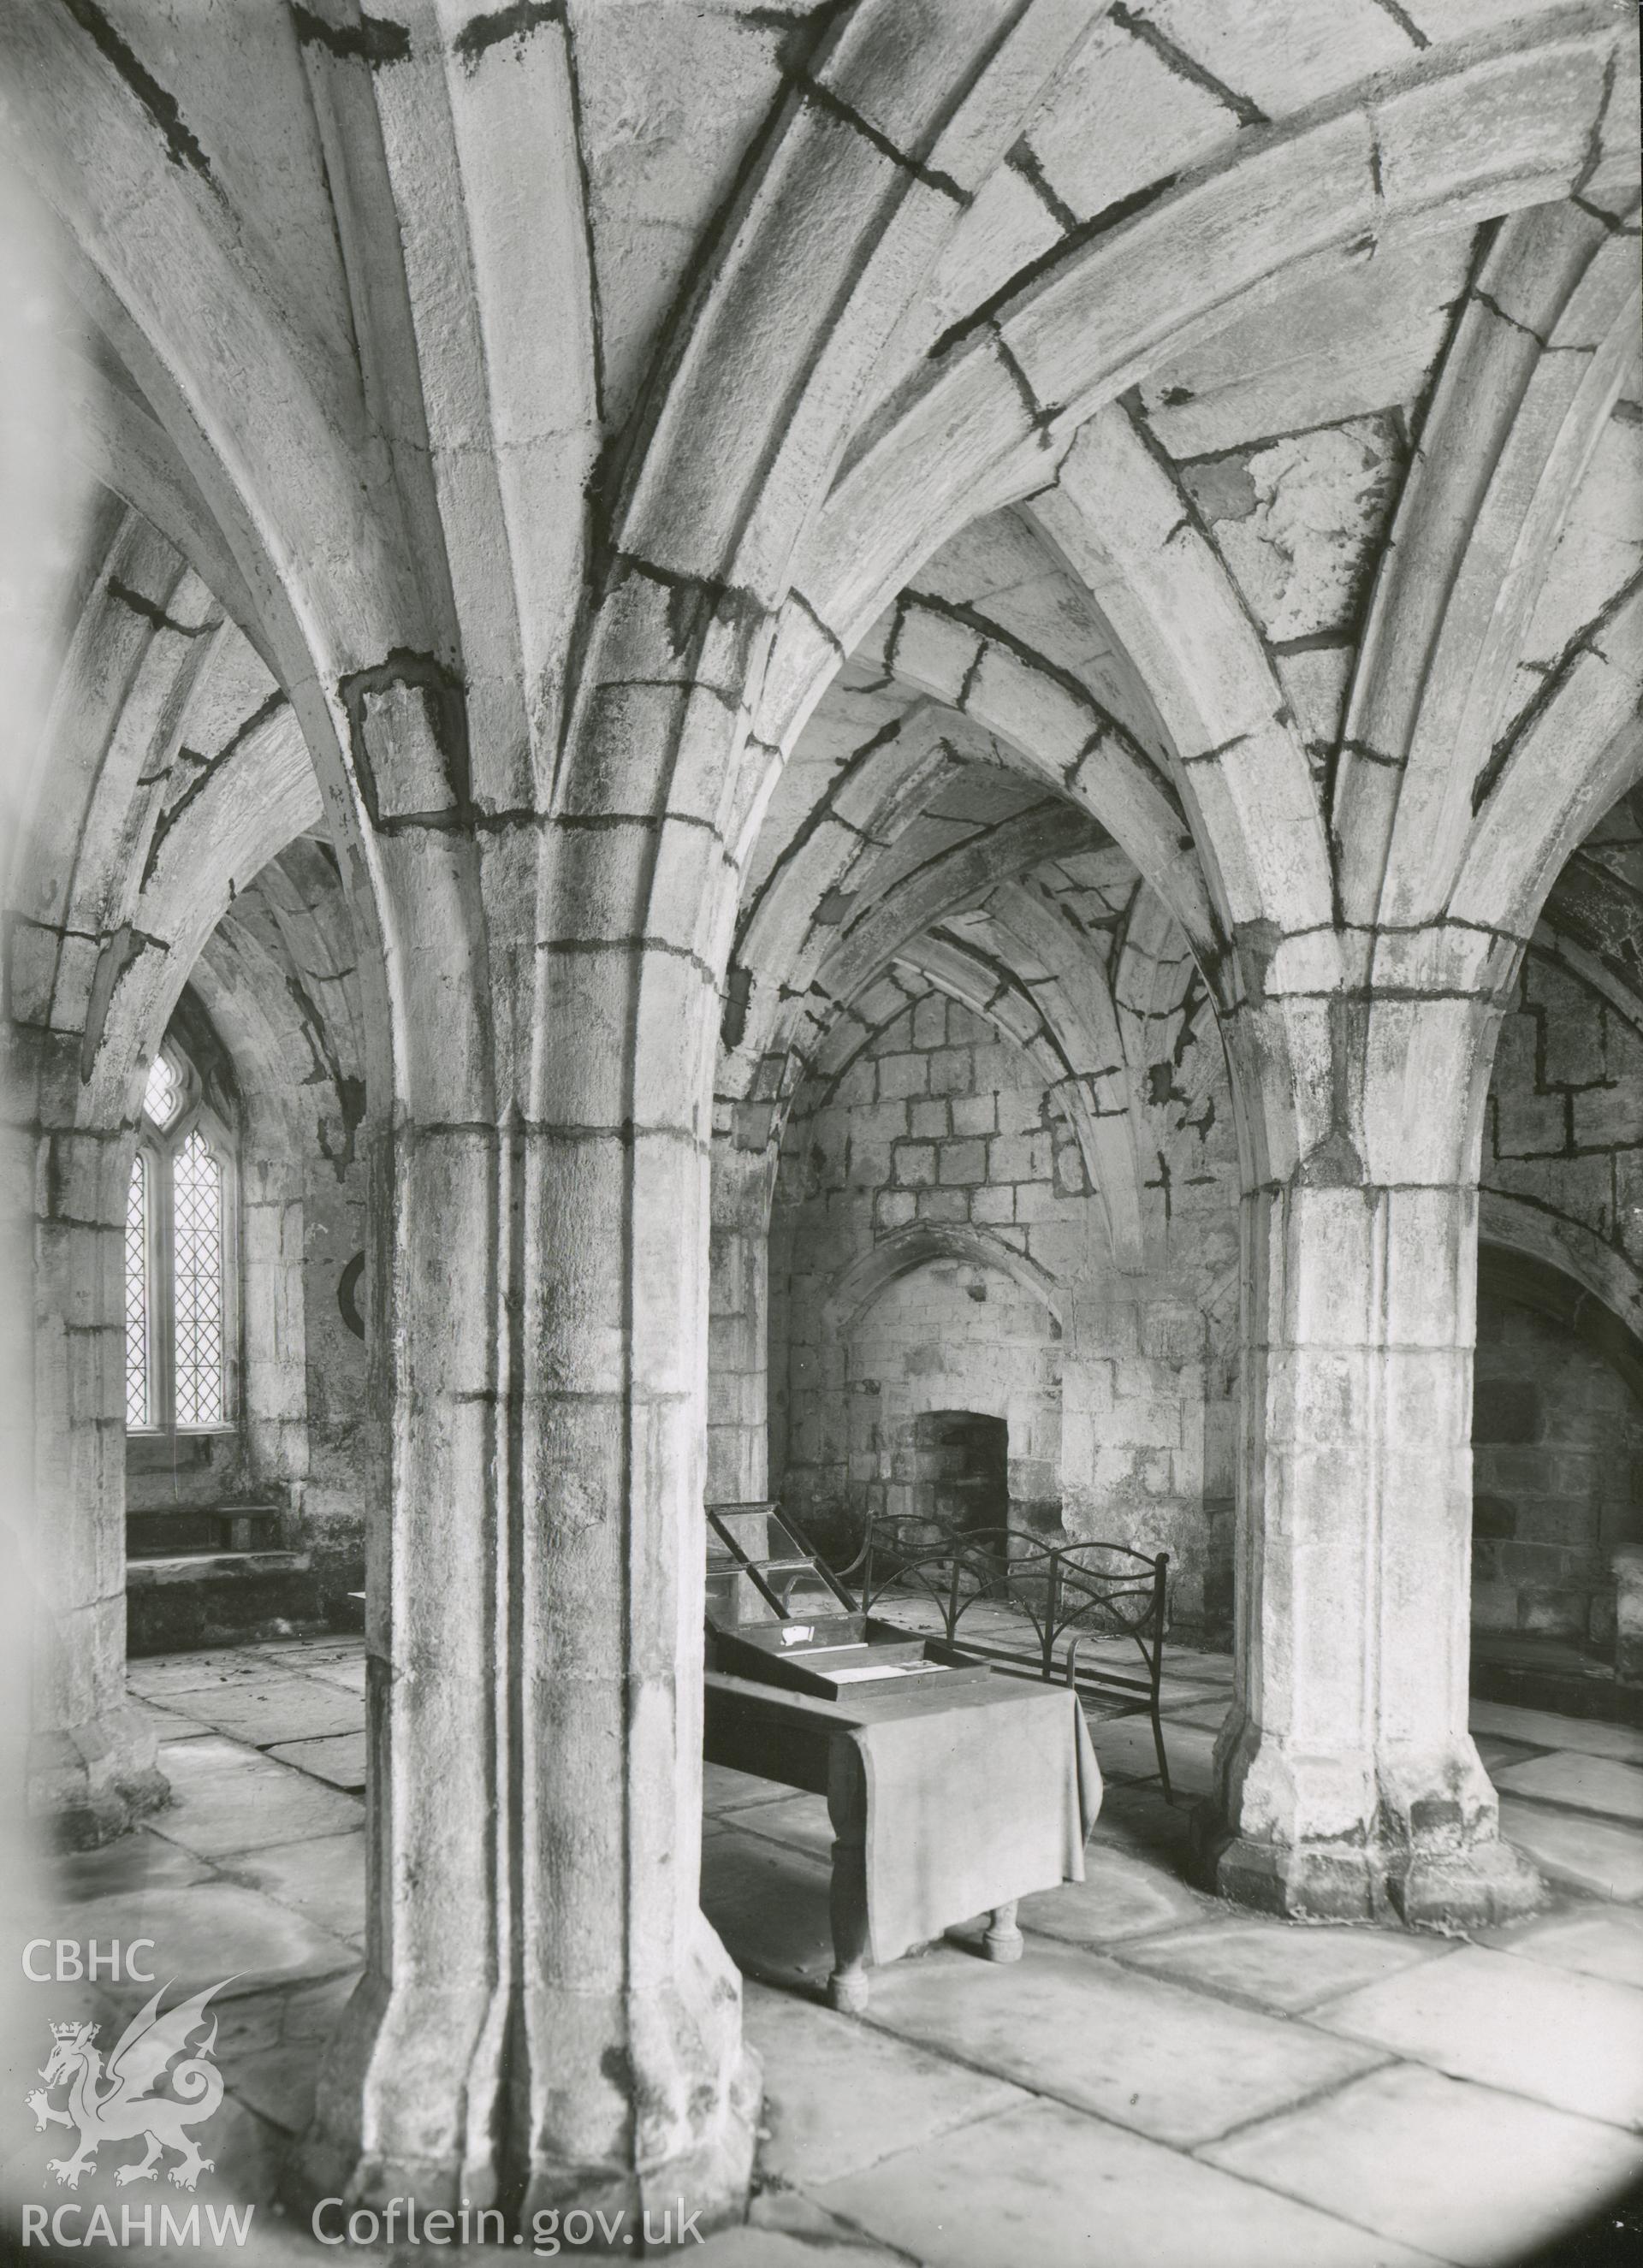 Digitised copy of a black and white photograph showing Chapter House at Valle Crucis Abbey taken by F.H. Crossley, 1948. Negative held by NMR England.